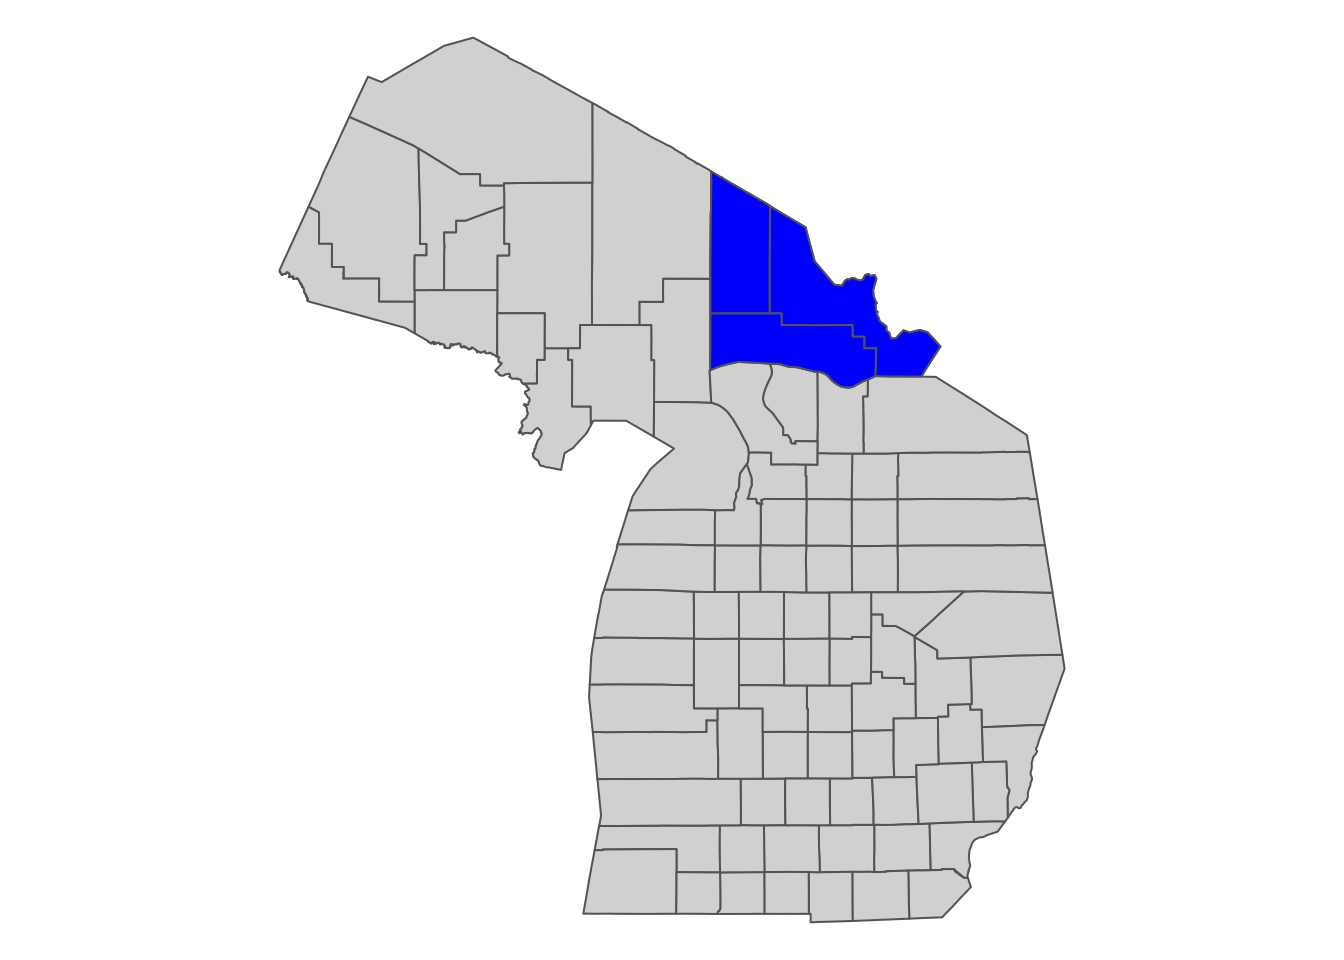 Select Michigan counties for which we download Daymet data